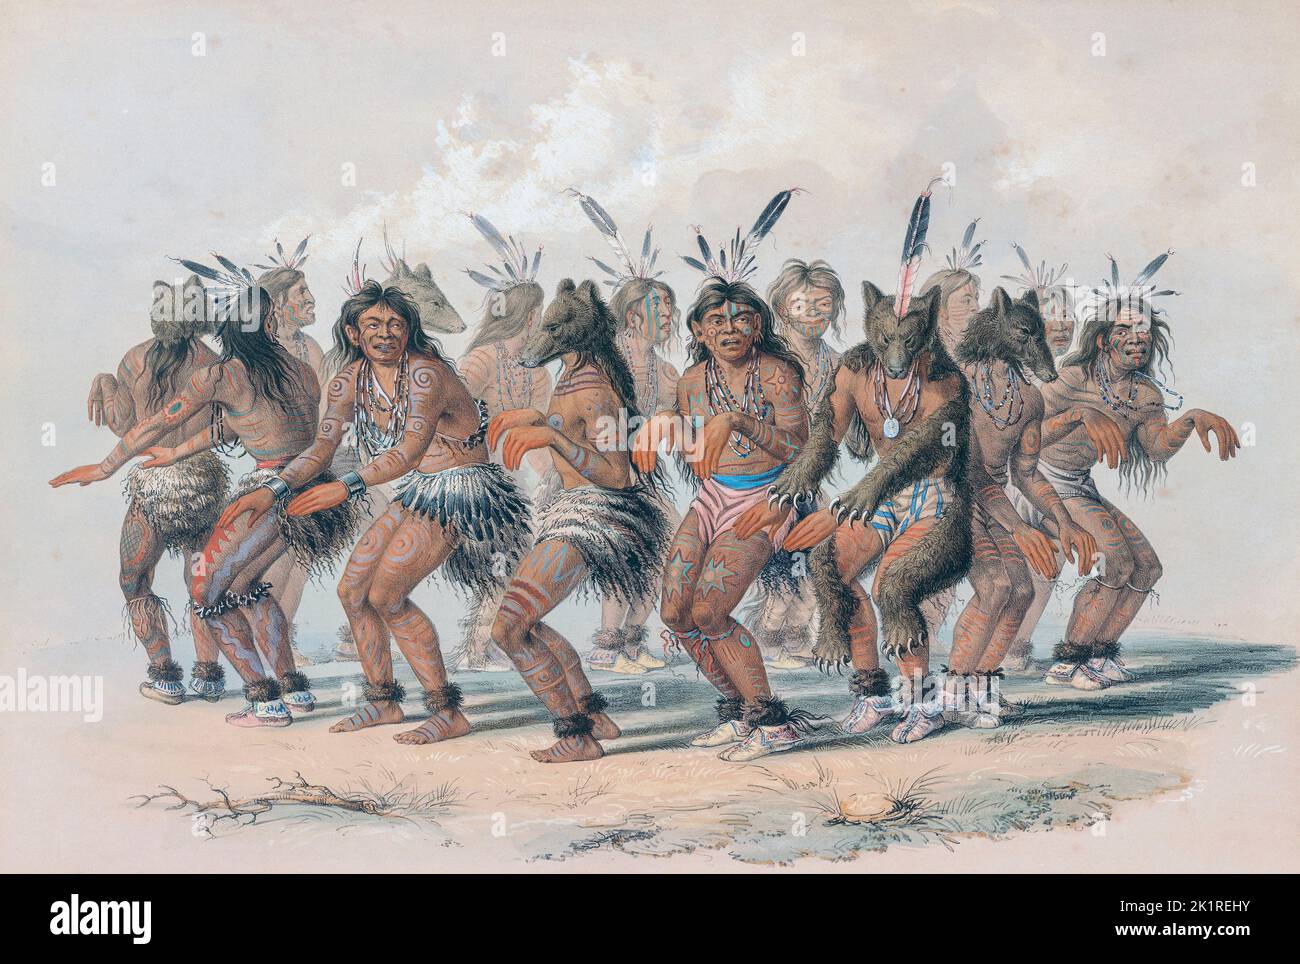 The Bear Dance.  A 10 day long ceremony performed by the Ute tribe (after whom the state of Utah is named.)  From Catlin's North American Indian Portfolio, published in London 1844 by the artist, American adventurer George Catlin, 1796 - 1872.  During many journeys Catlin recorded with pen and brush the customs and life-styles of Native American tribes. Stock Photo